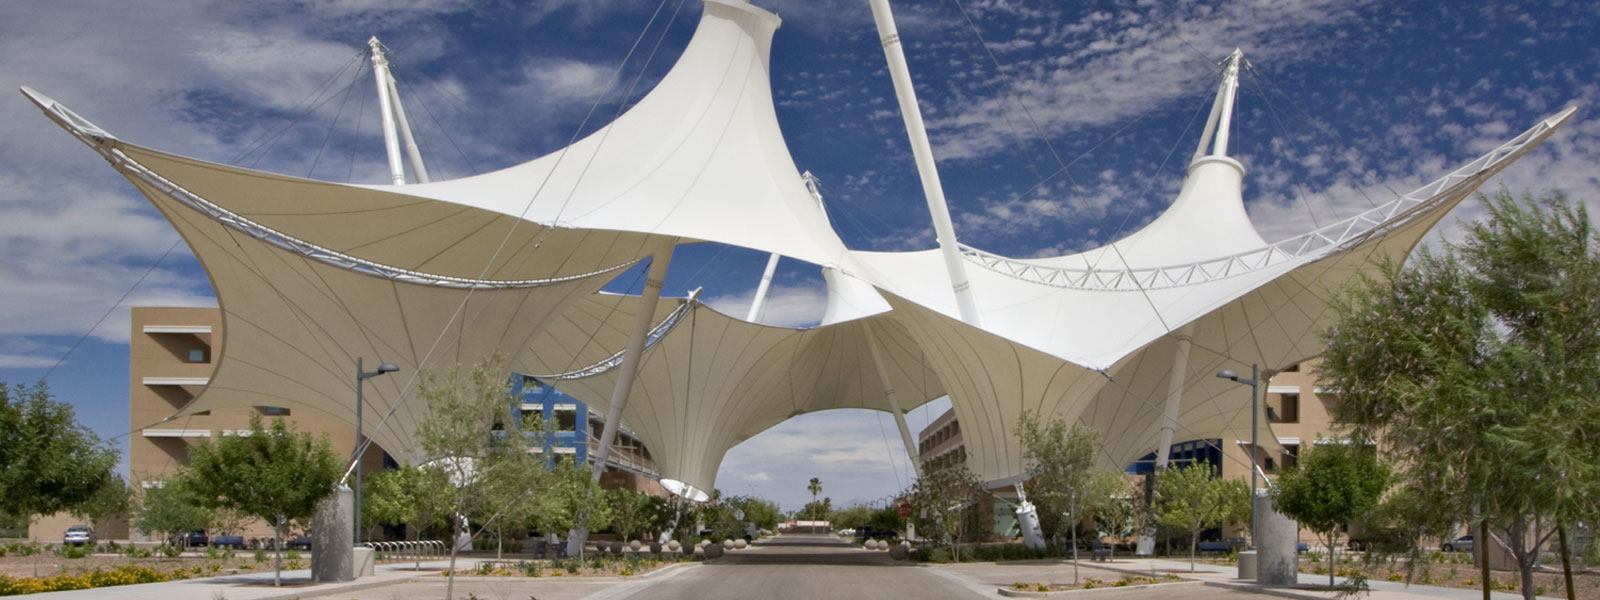 How to Choose the Right Tensile Structure for Your Needs